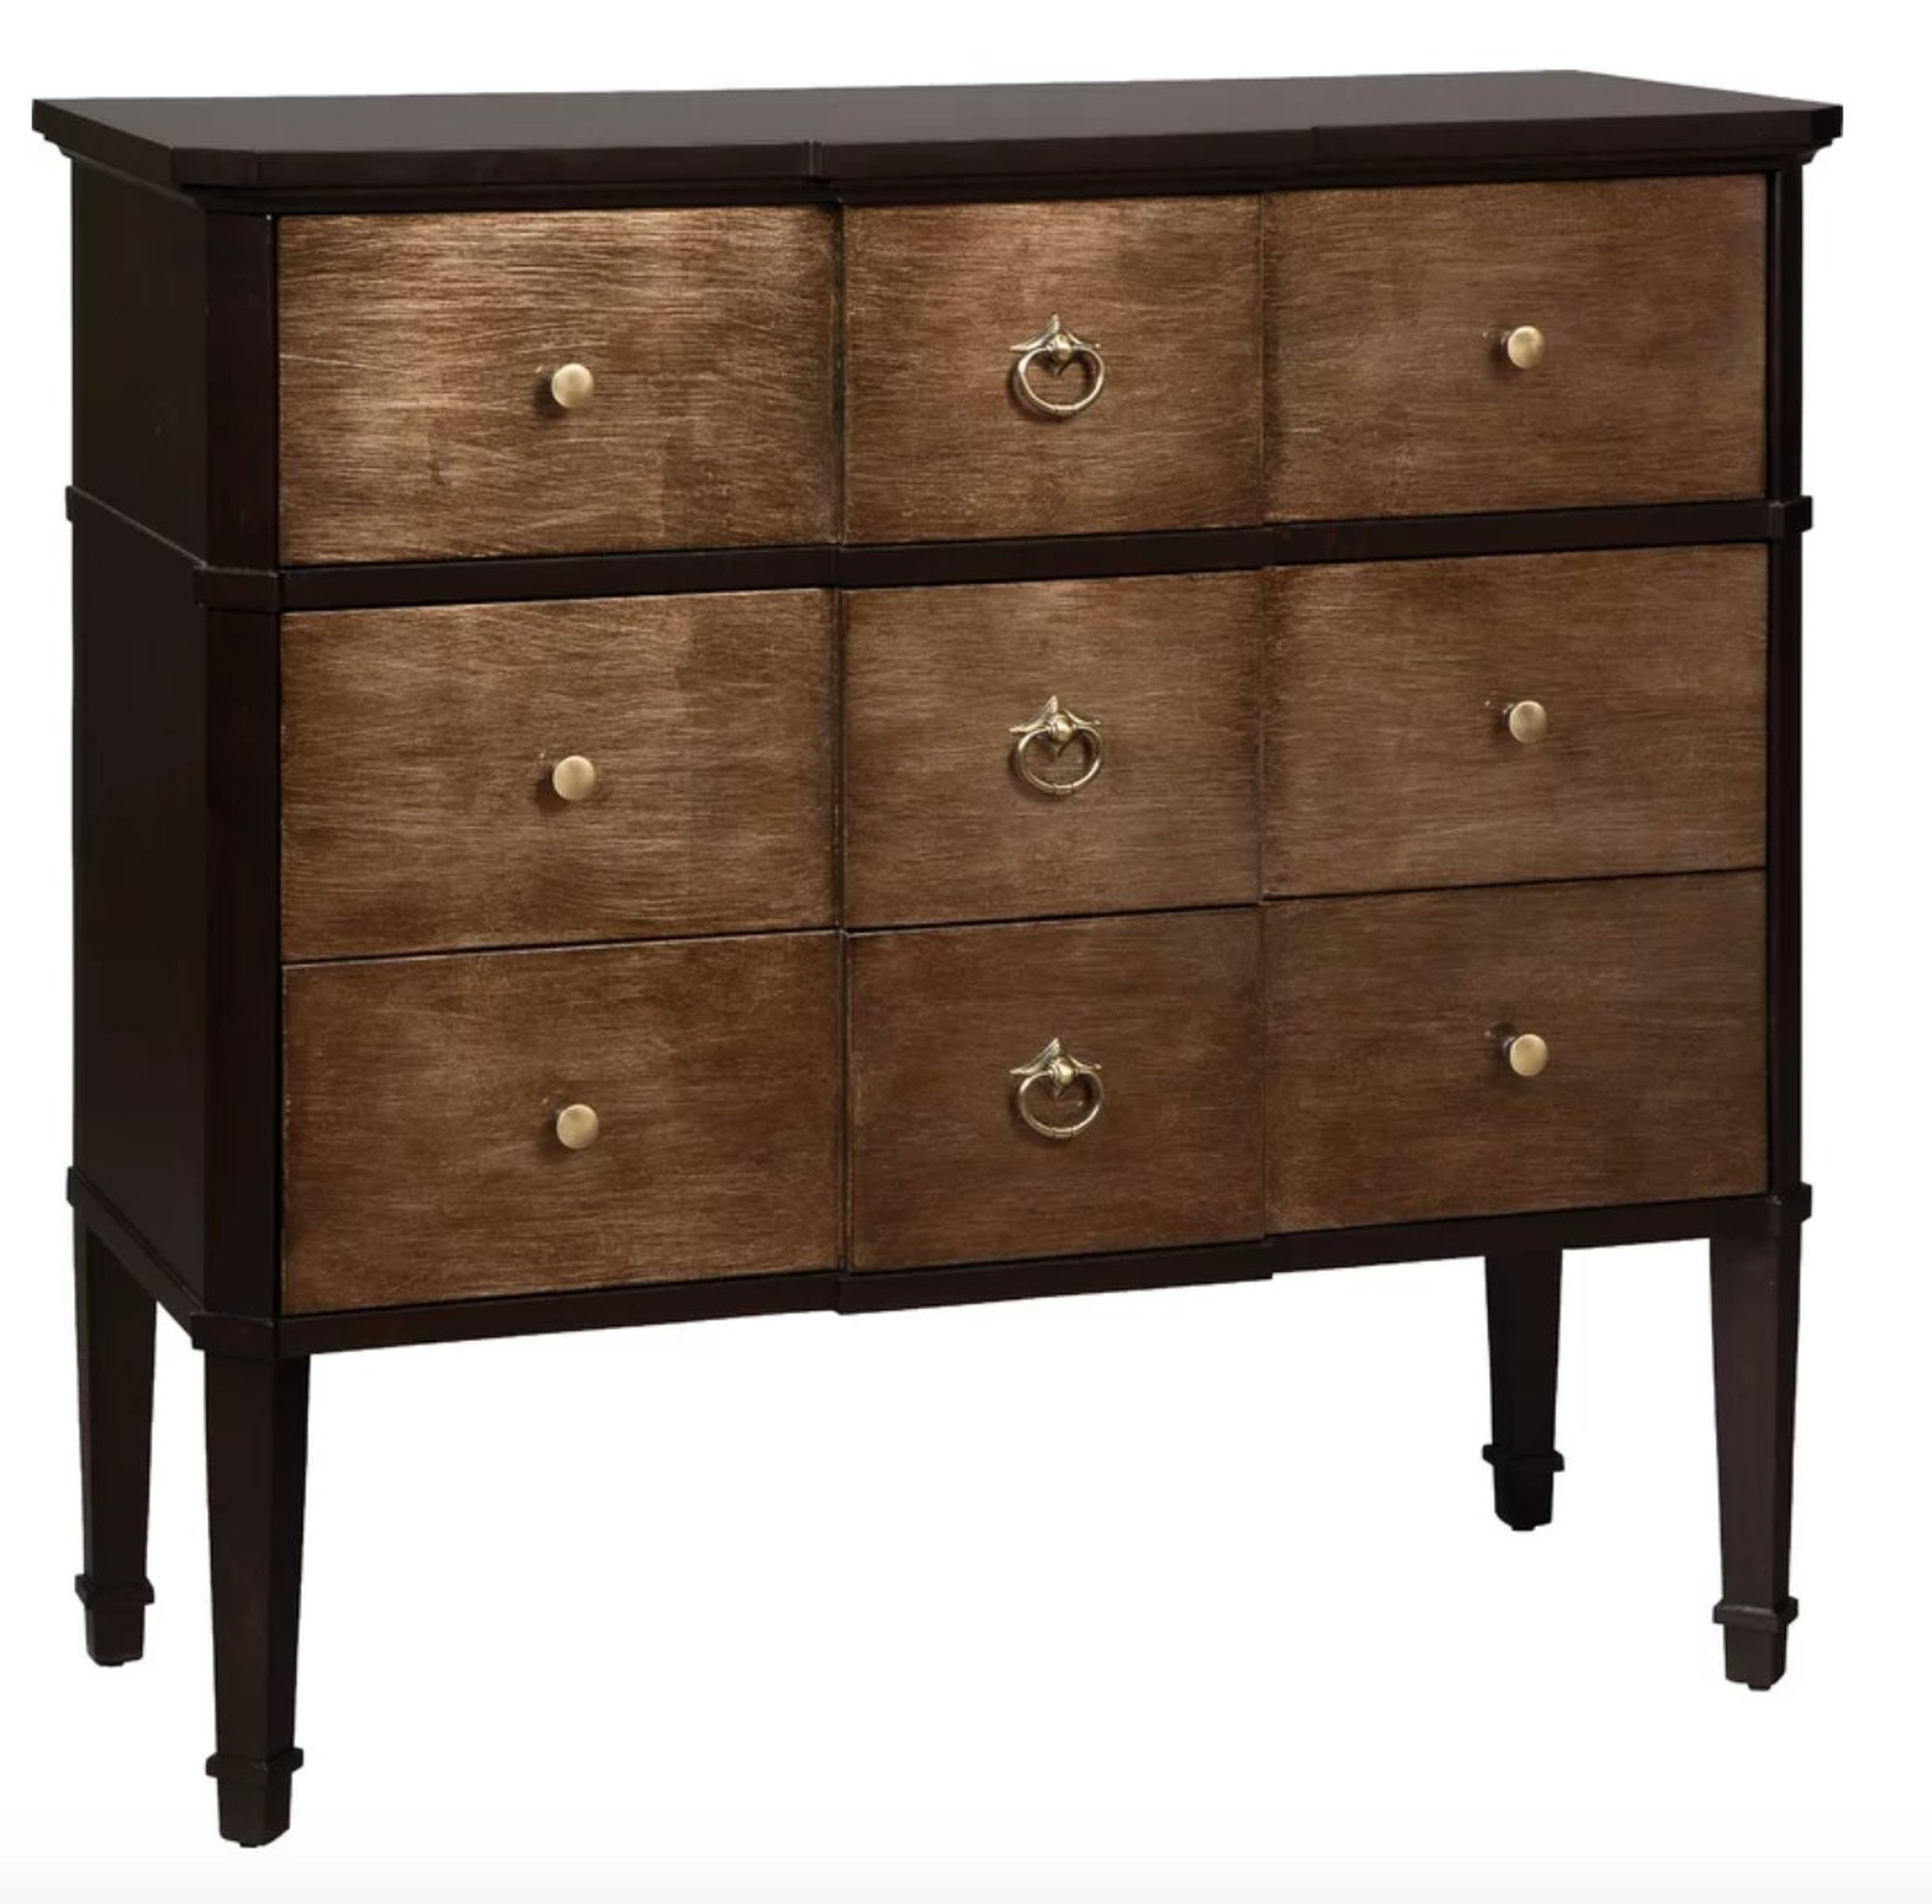 ANTIQUITY 3 DRAWER ACCENT CHEST - Perigold